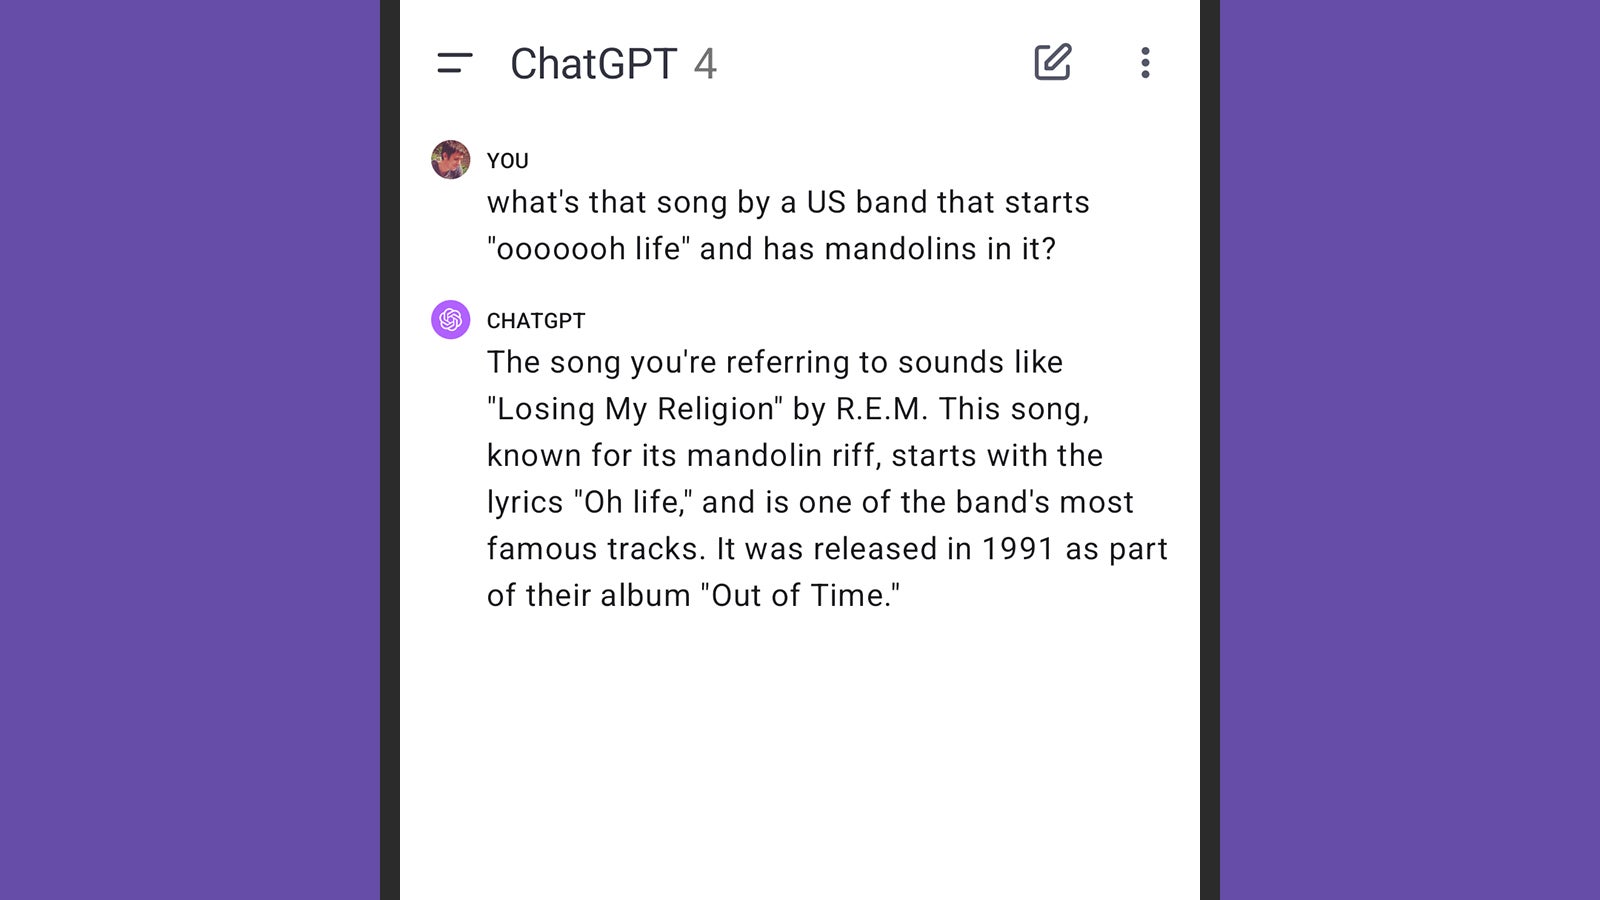 Give ChatGPT some details, and see what it comes up with.